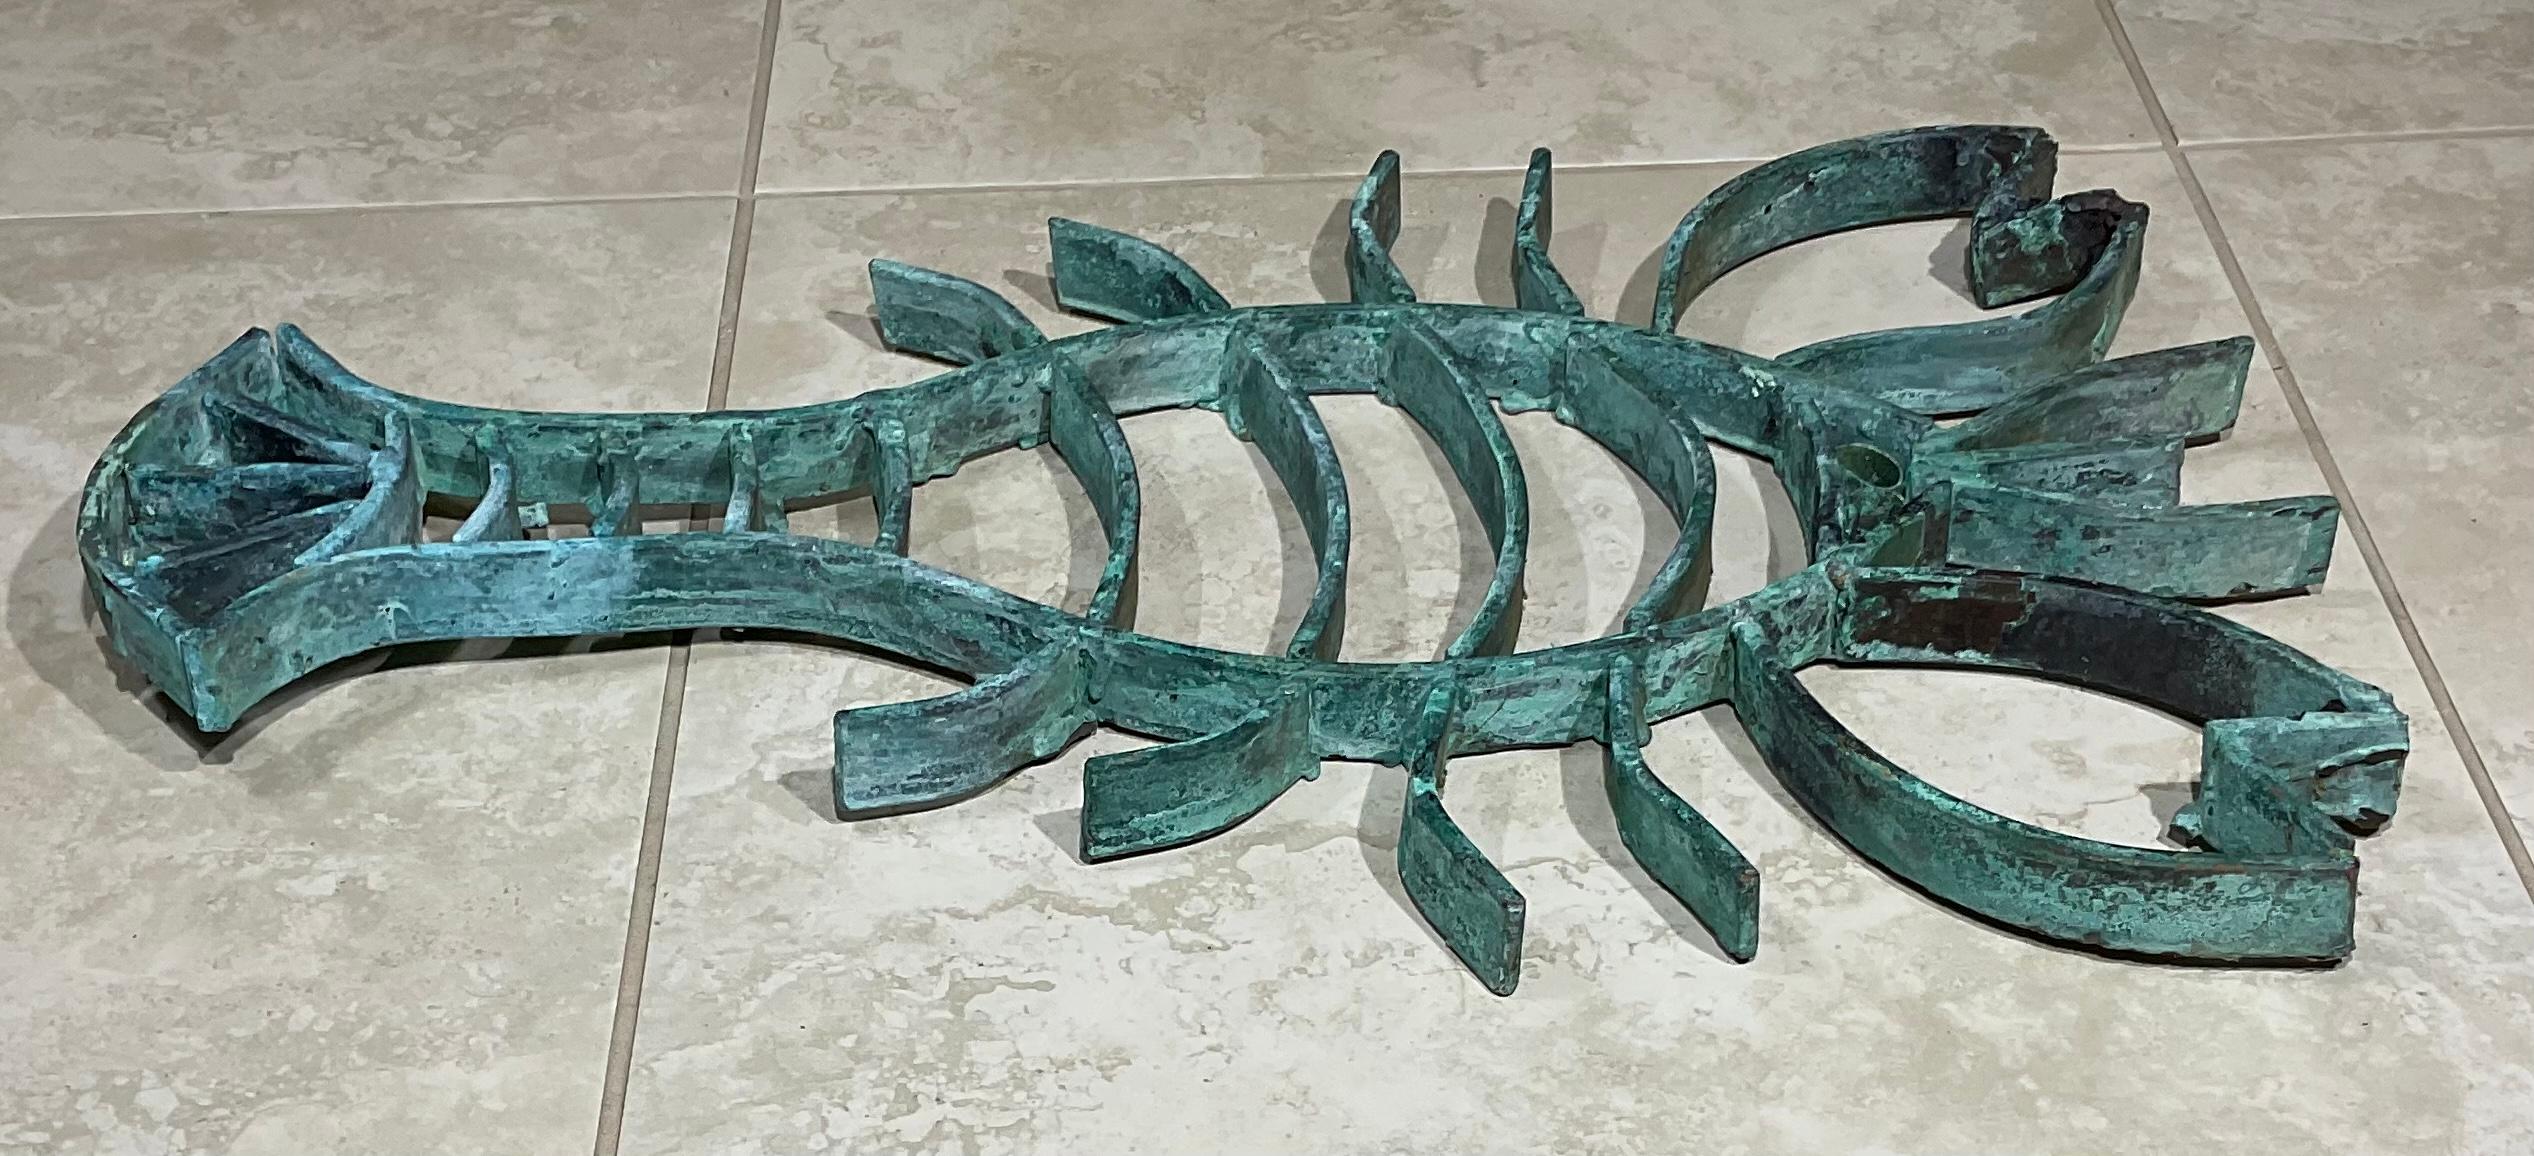 Exceptional crab sculpture artistically made from solid copper originally were part of very impressive gate salvaged from south Florida, will look great as architectural wall hanging indoor or outdoor, will not rust beautiful oxidization color.